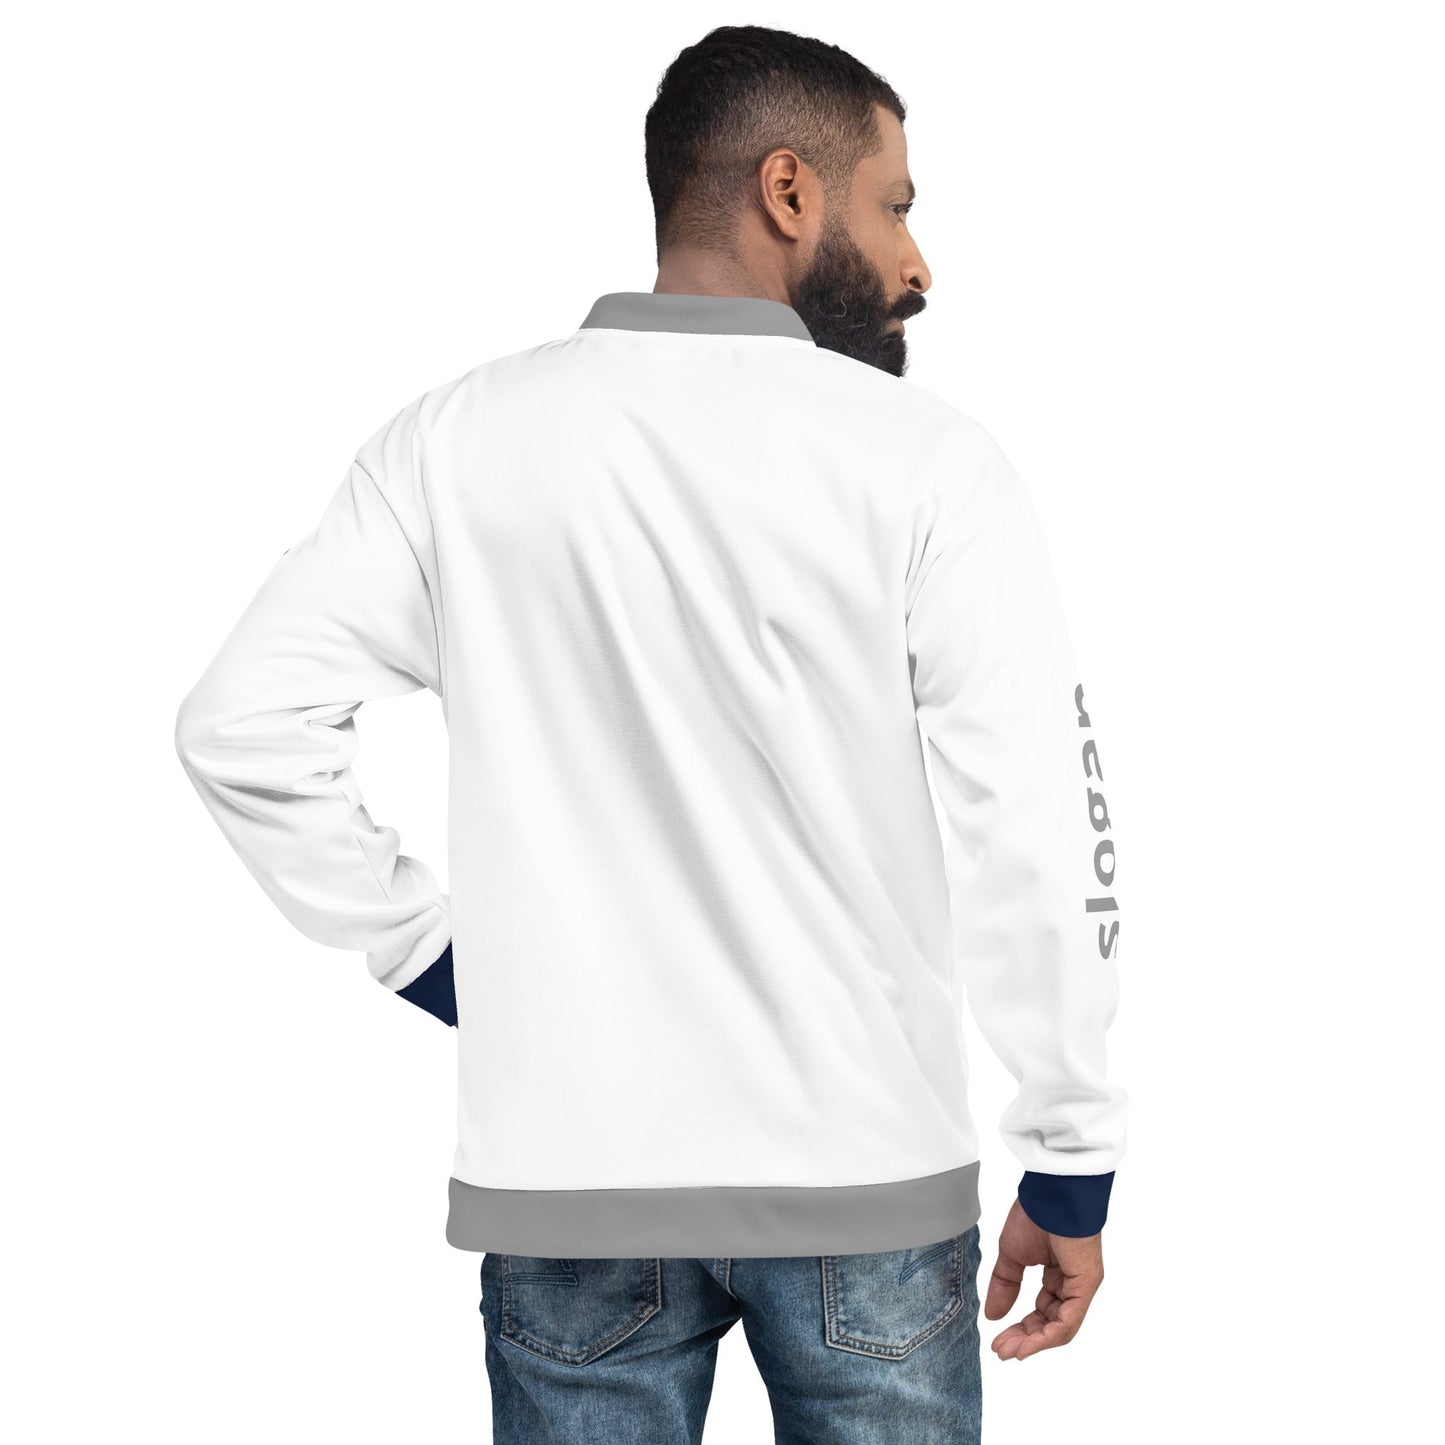 TIME OF VIBES - Jacket Demo CORPORATE - €99.00